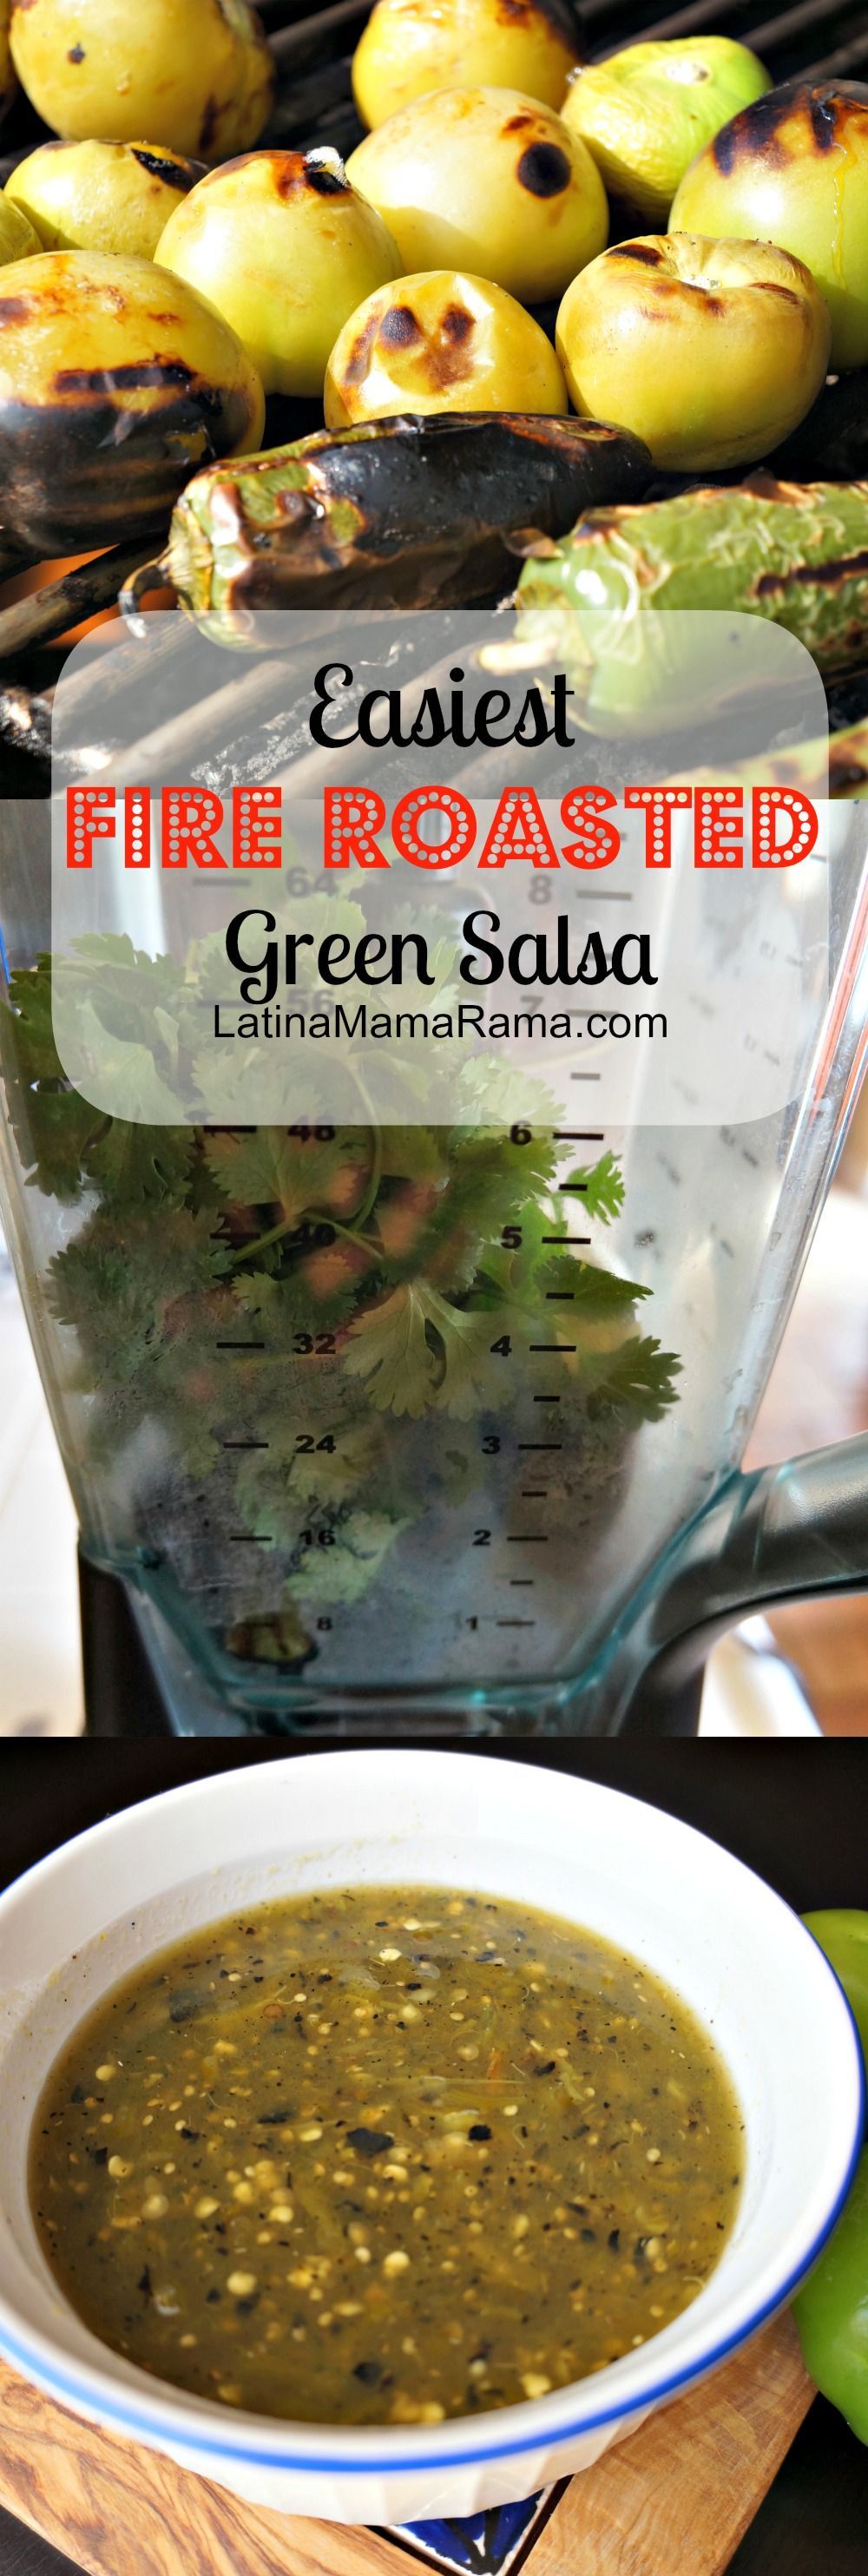 Easiest Fire Roasted Green Salsa to